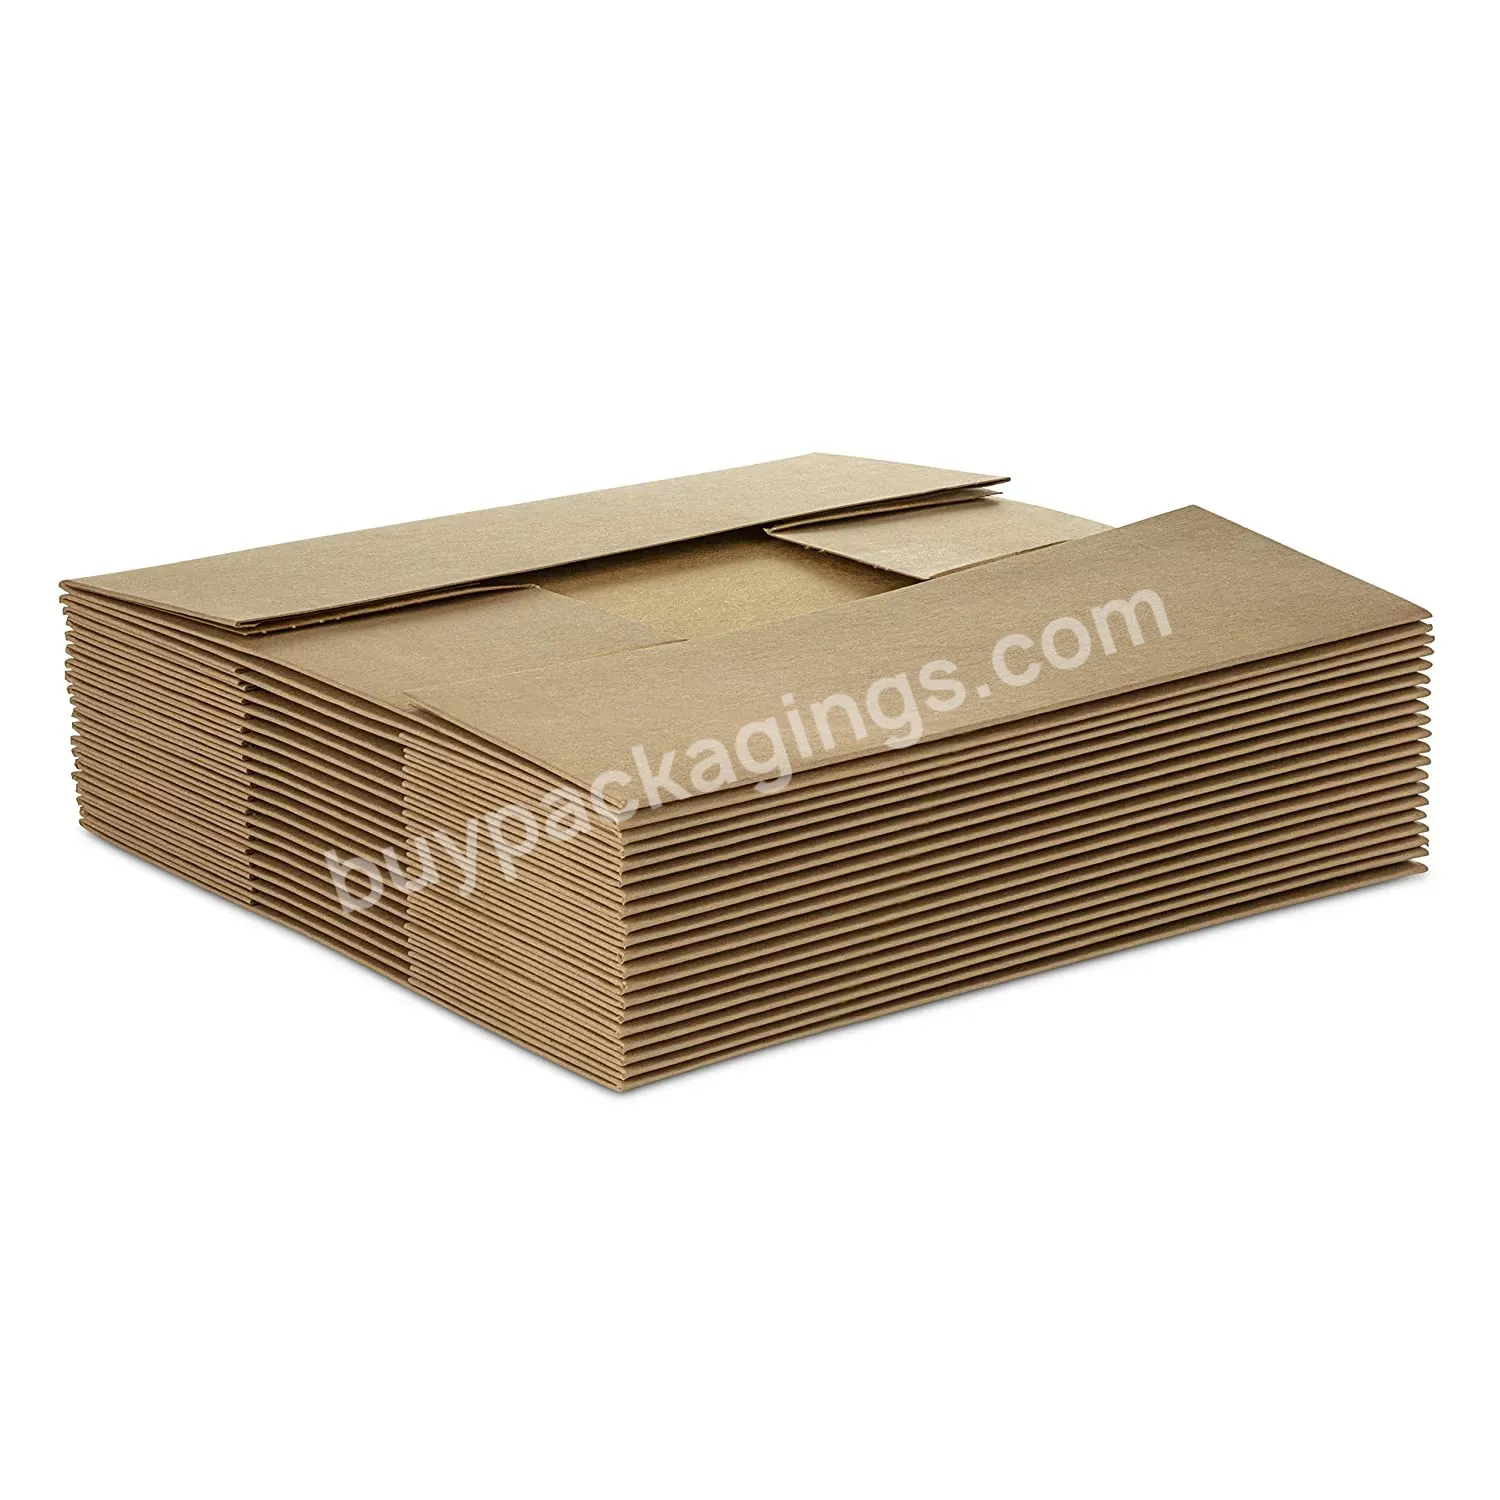 Paperboard 4 Corner Pop Up Food Tray For Holding Food At Stadiums Or Theaters Food Carton Box Can Be Customized - Buy Food Carton Box,Food Packaging,Food Trays.